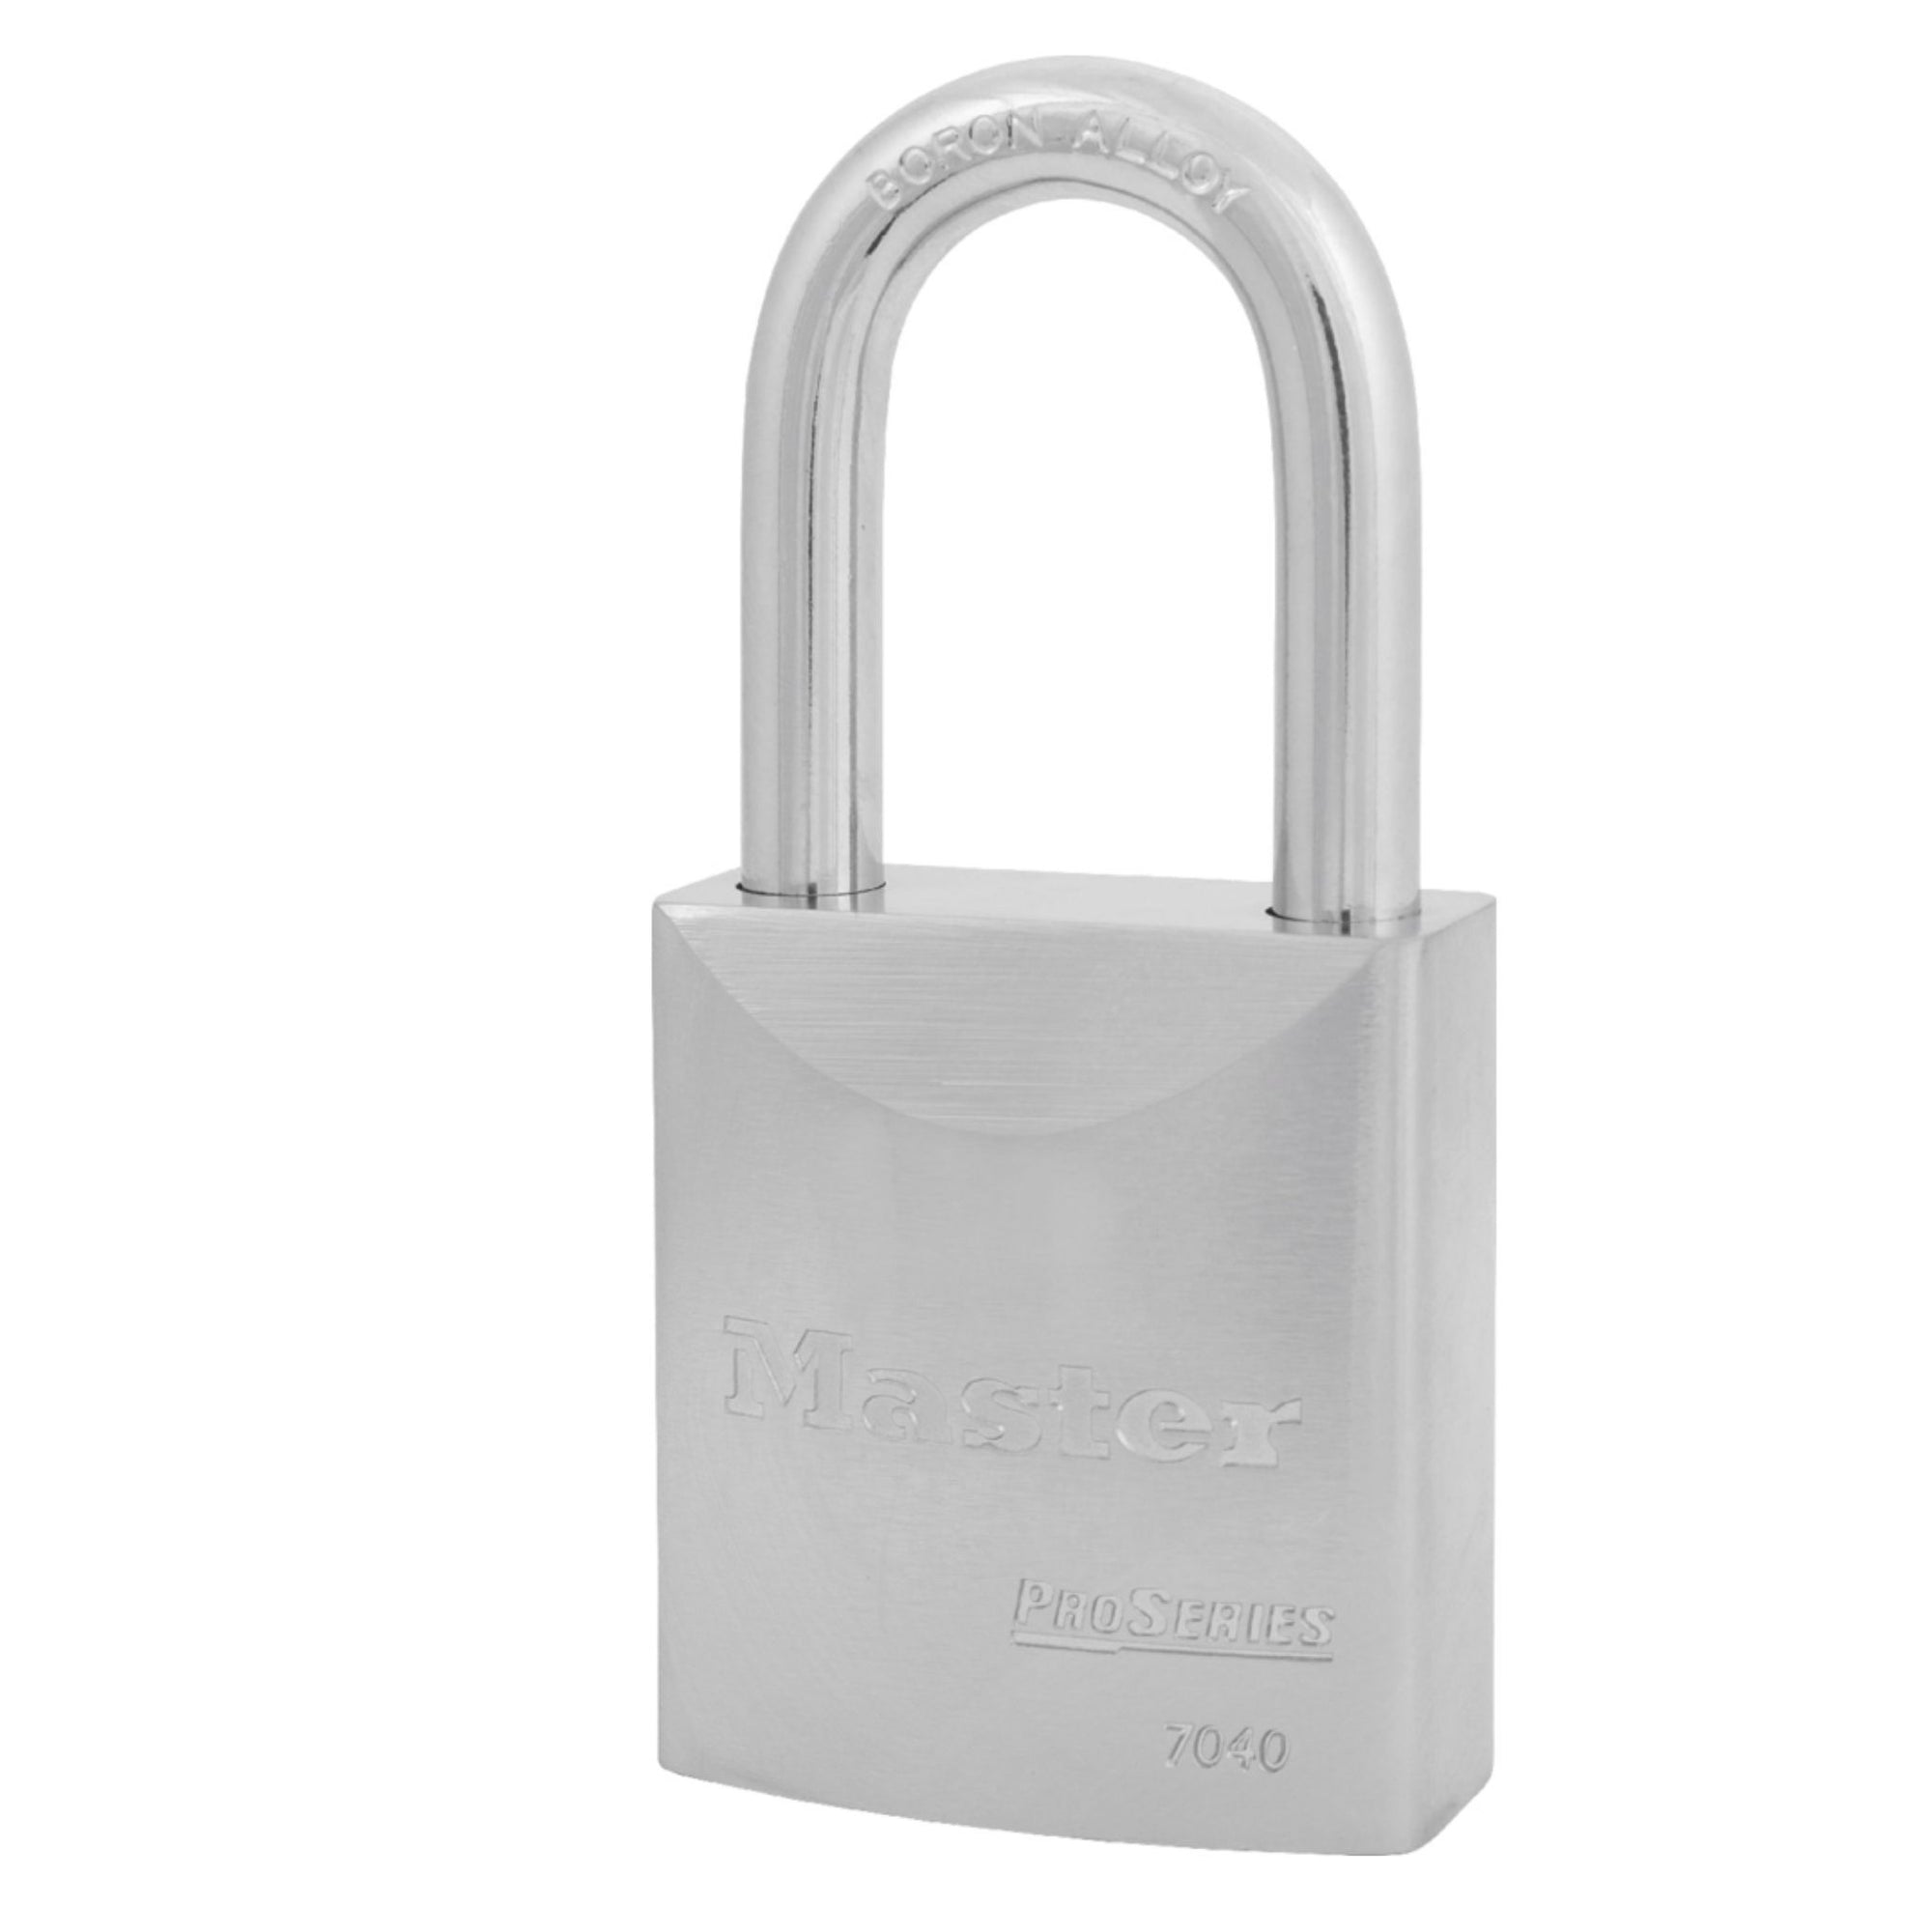 Master Lock 7040LF Pro Series Steel Padlock with 1-1/2" Shackle - The Lock Source